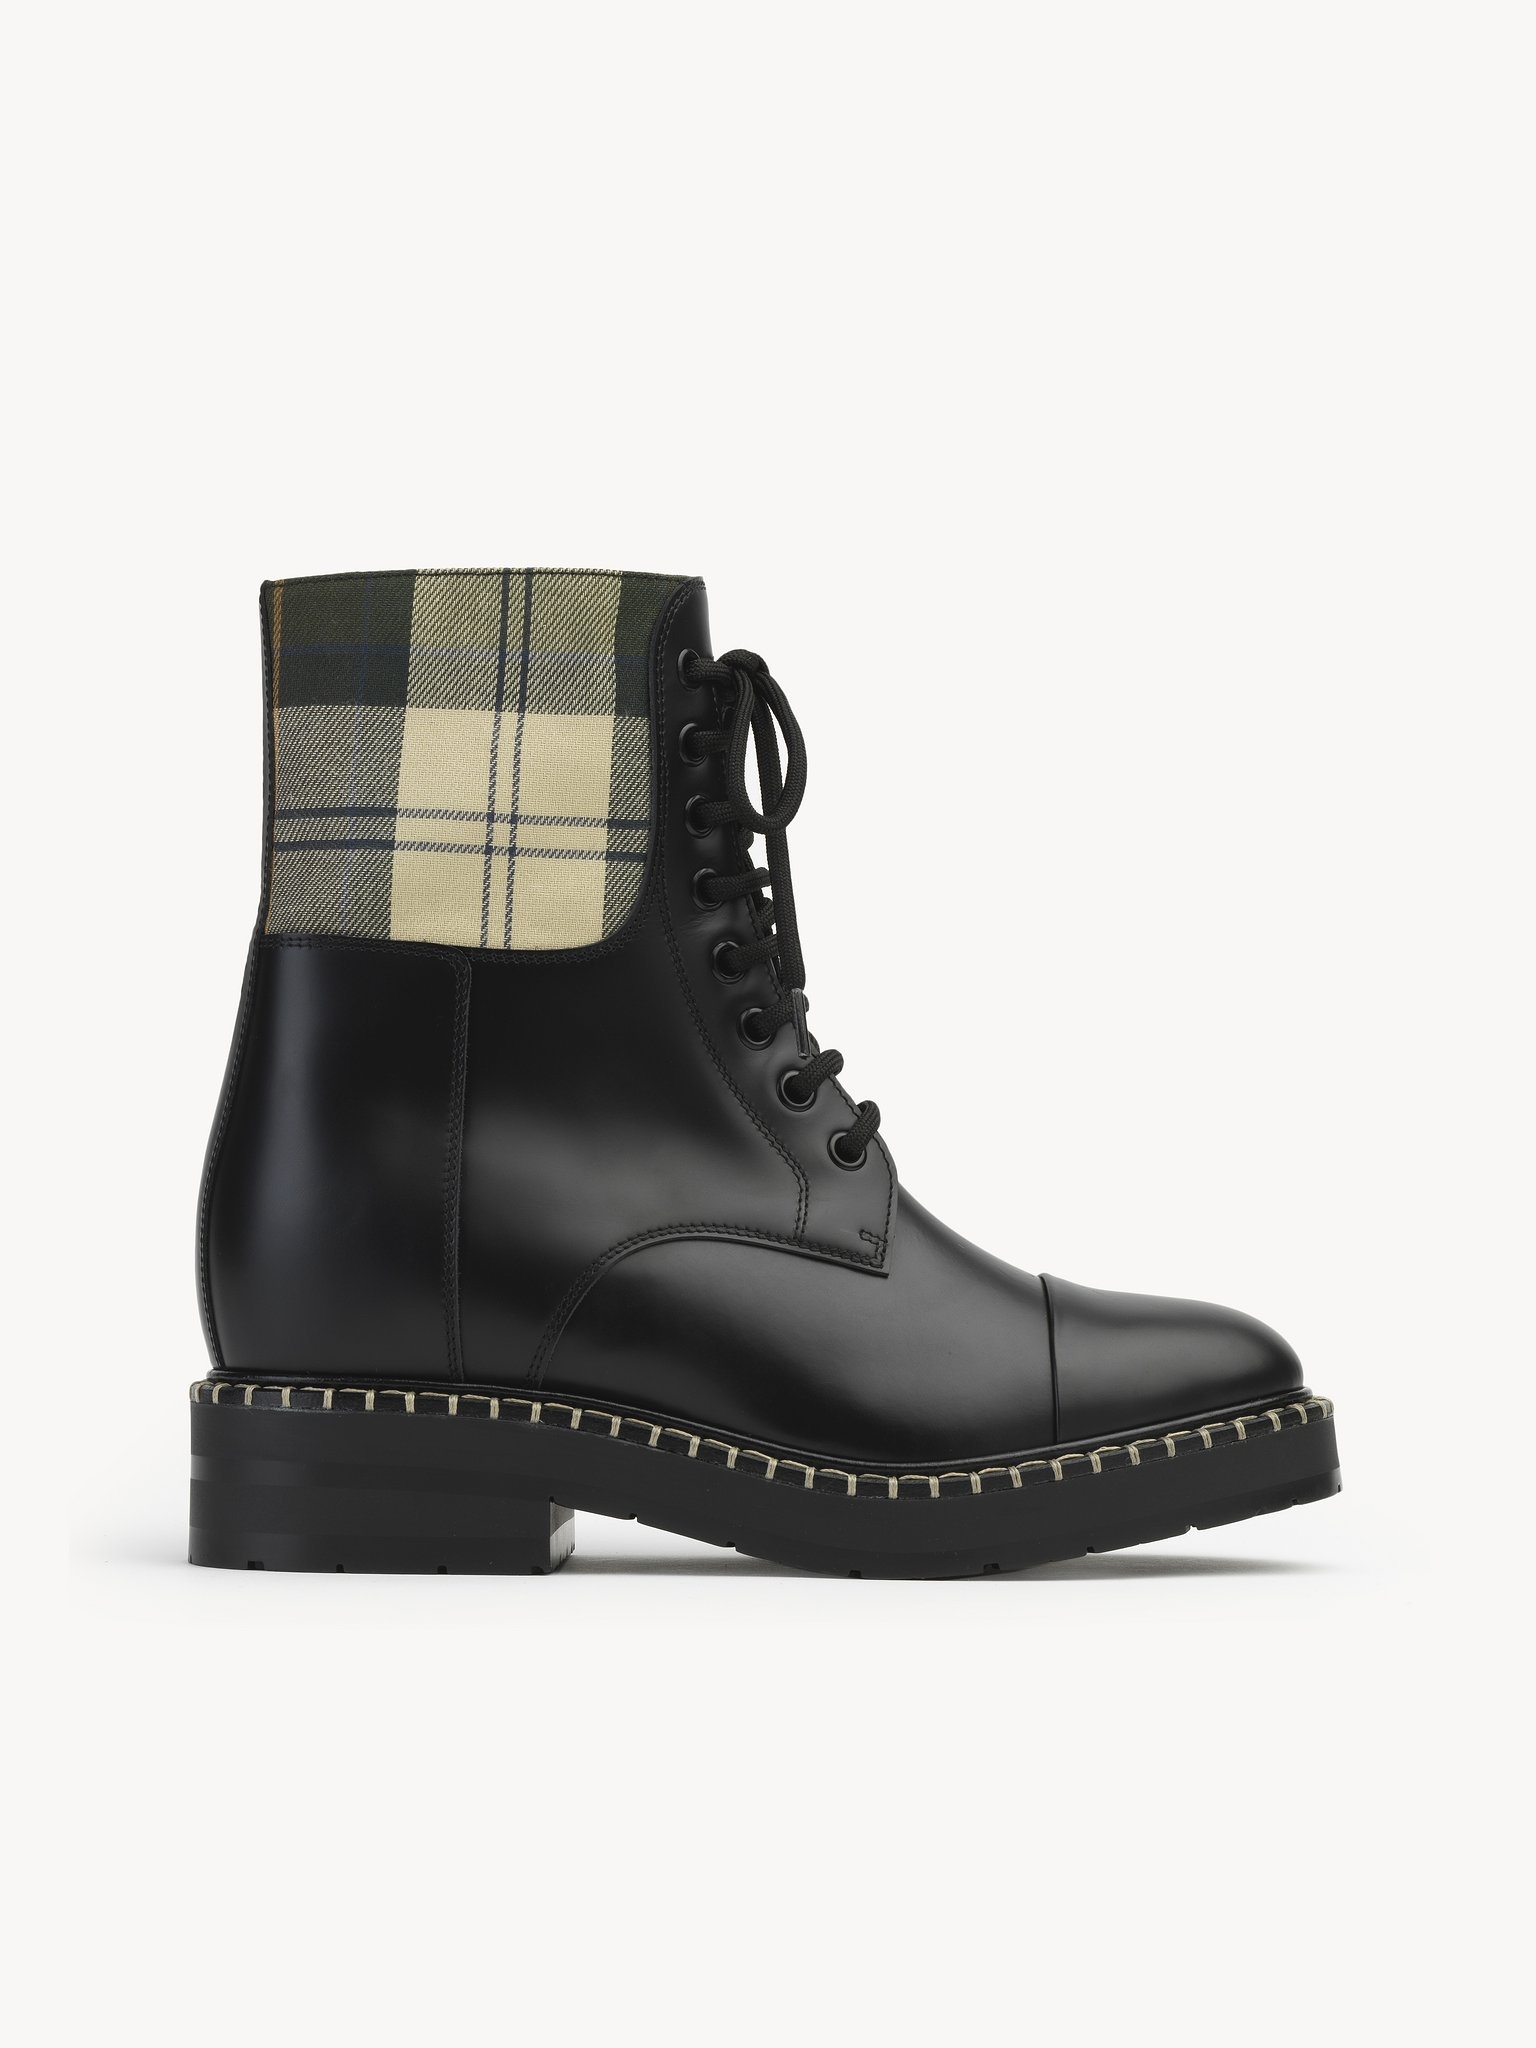 BARBOUR FOR CHLOÉ ANKLE BOOT - 1